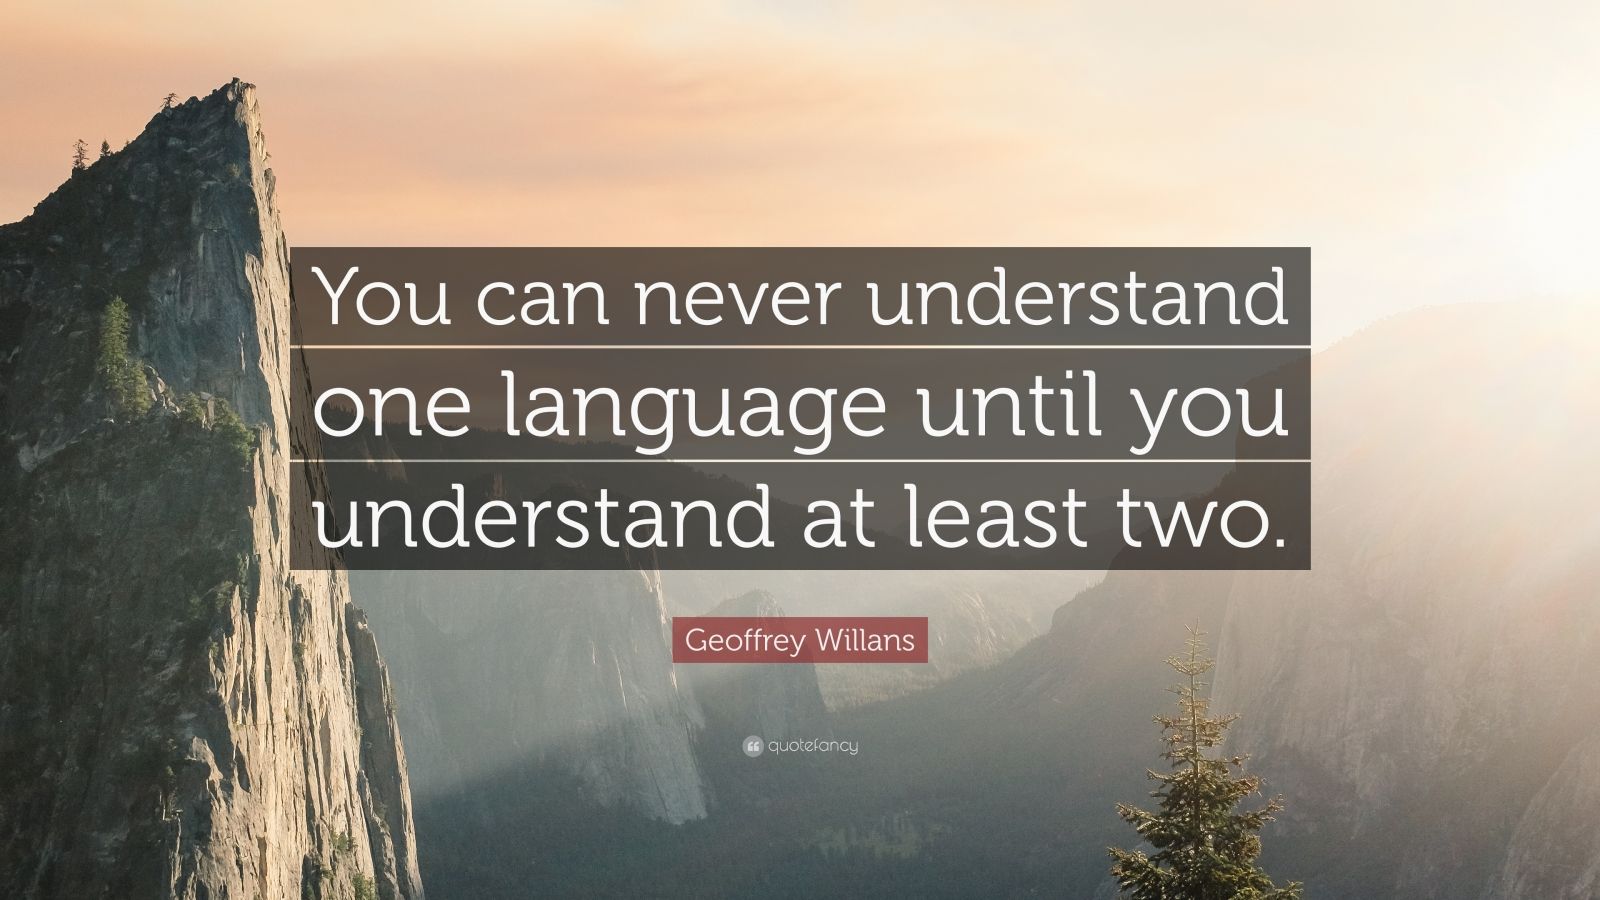 Geoffrey Willans Quote: “You can never understand one language until